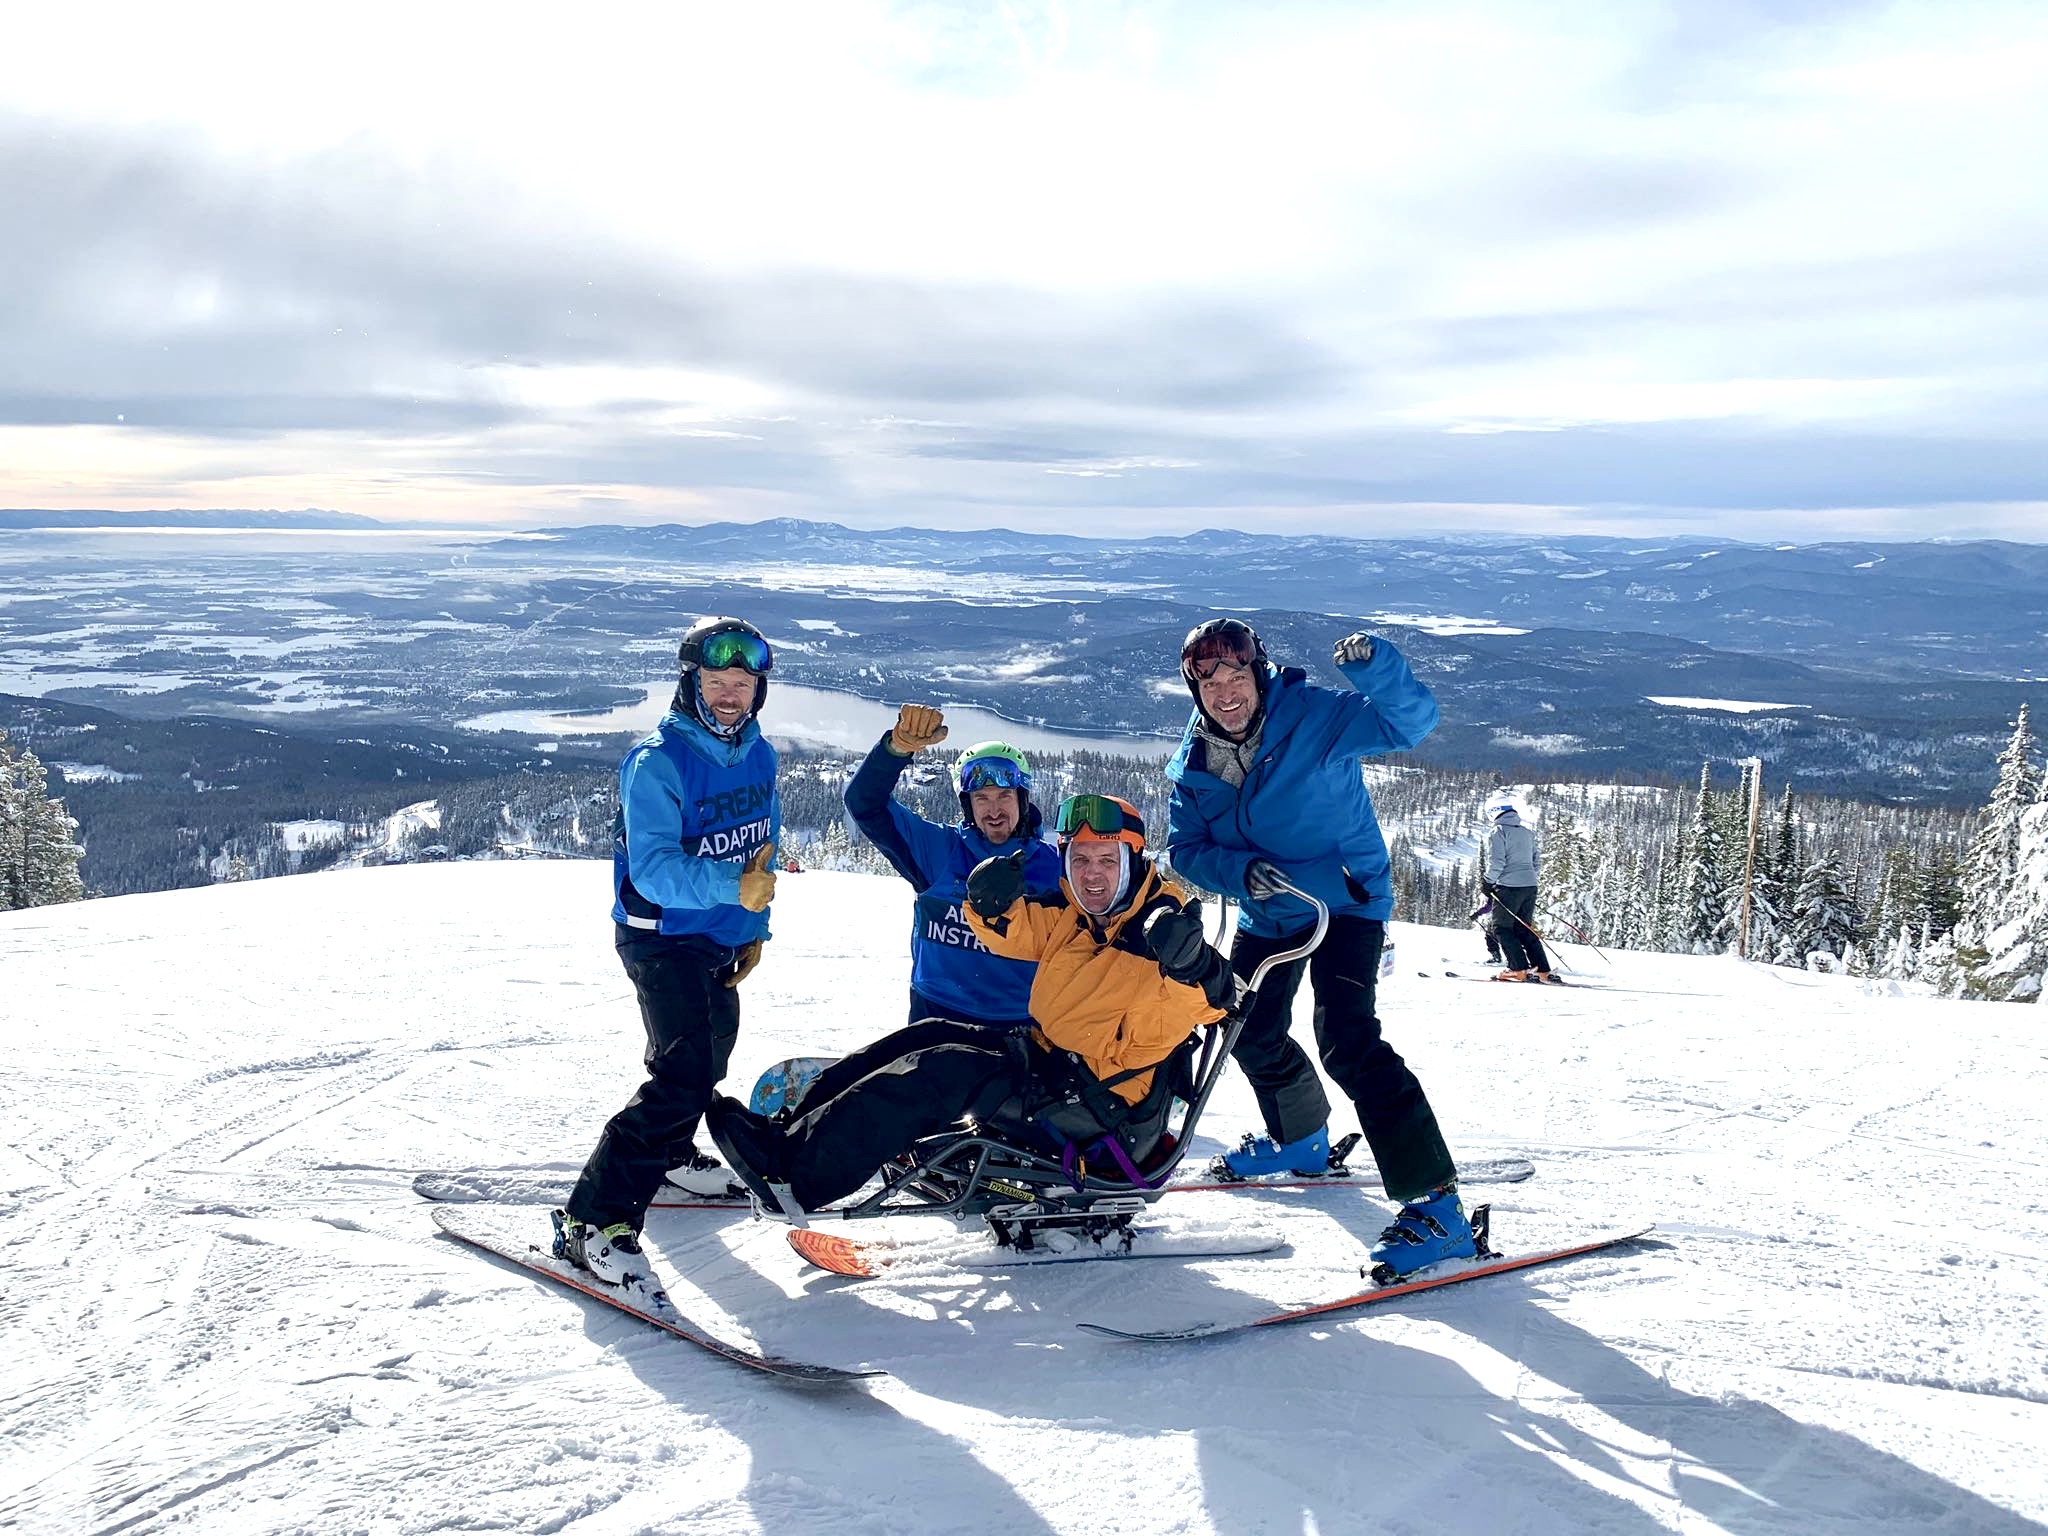 skiers (2 standing, 2 sitting) on mountain